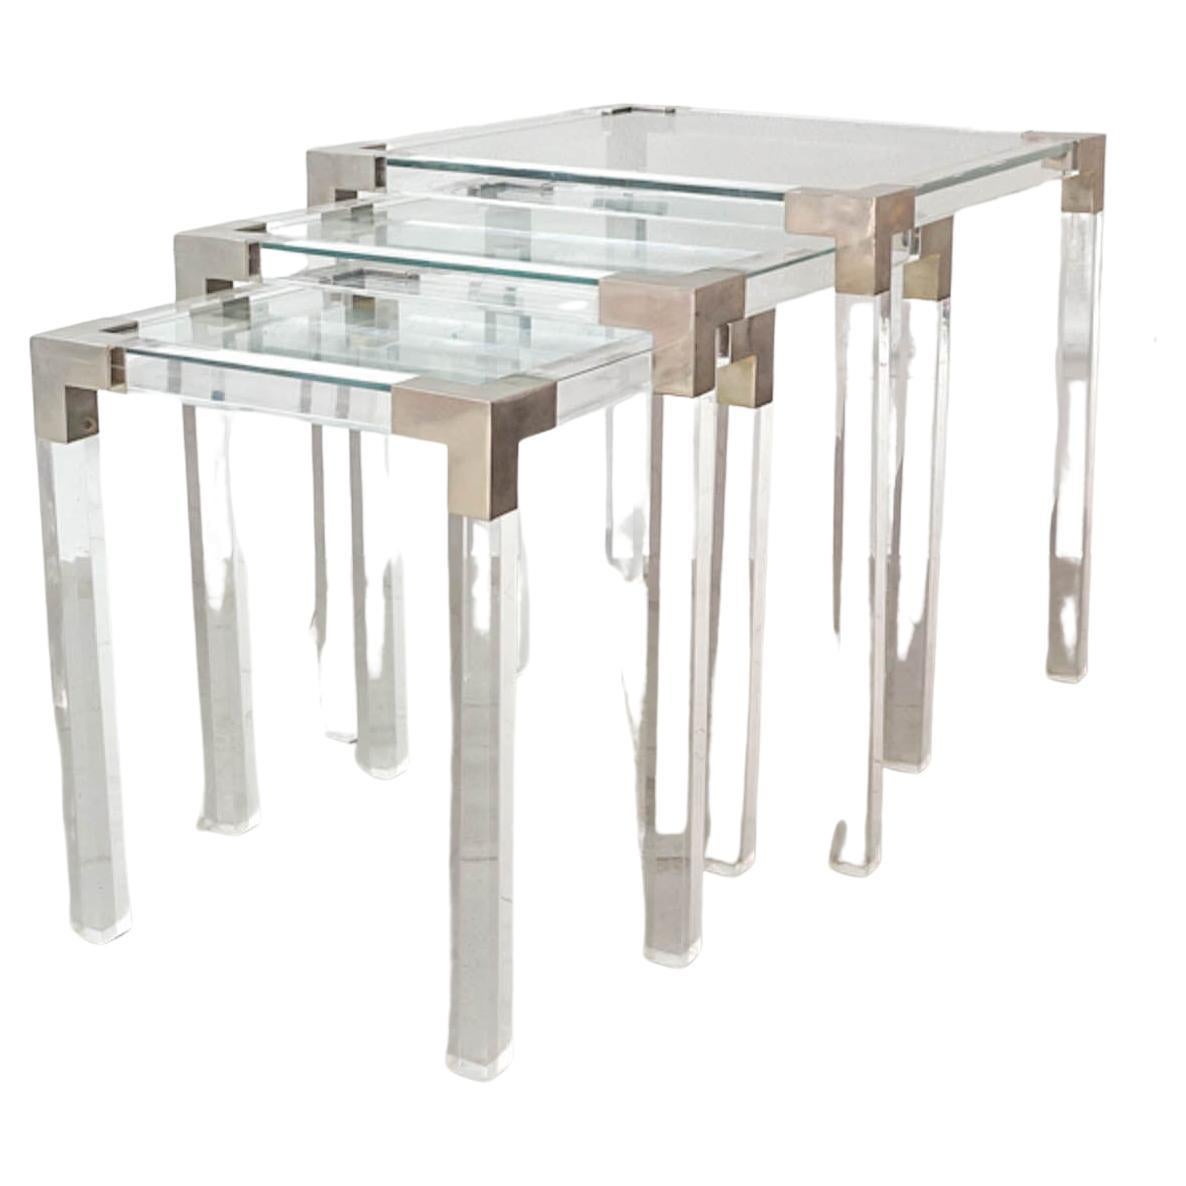 This set of 3 lucite nesting was designed and produced in the manner of Maison Jansen, in France during the 1970's. The structure of the tables is made of lucite and the corners are in brushed metal. The table tops are in clear glass. They are in